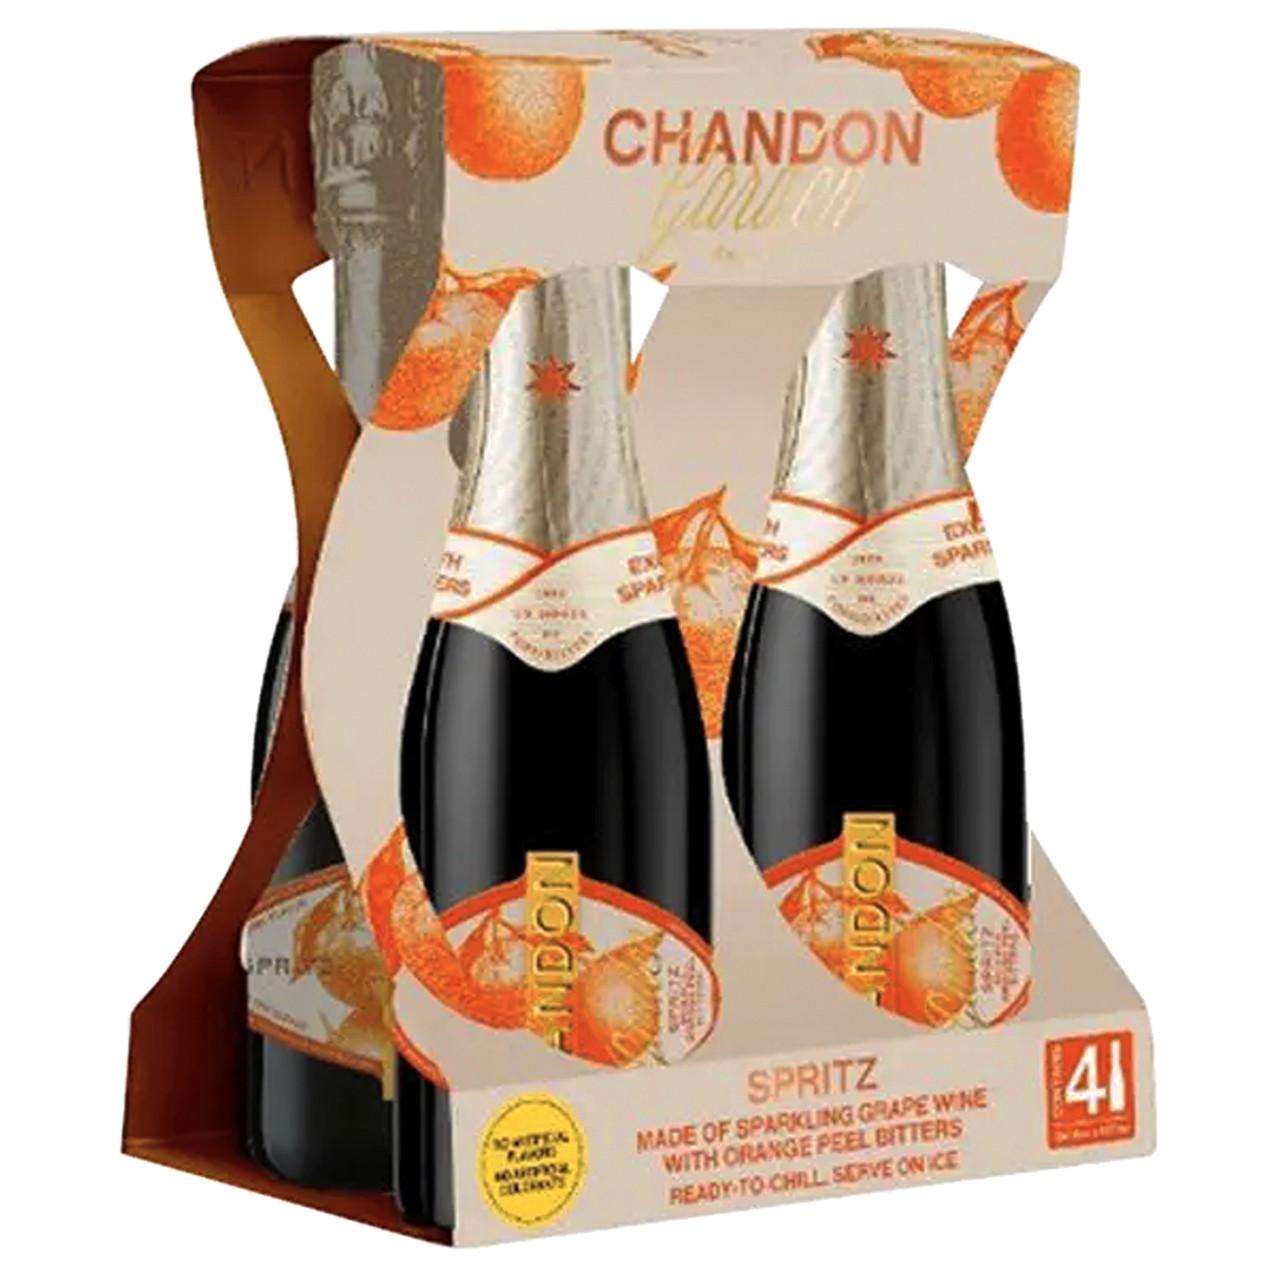 The Roast Purmerend - Order your Chandon Garden Spritz from our